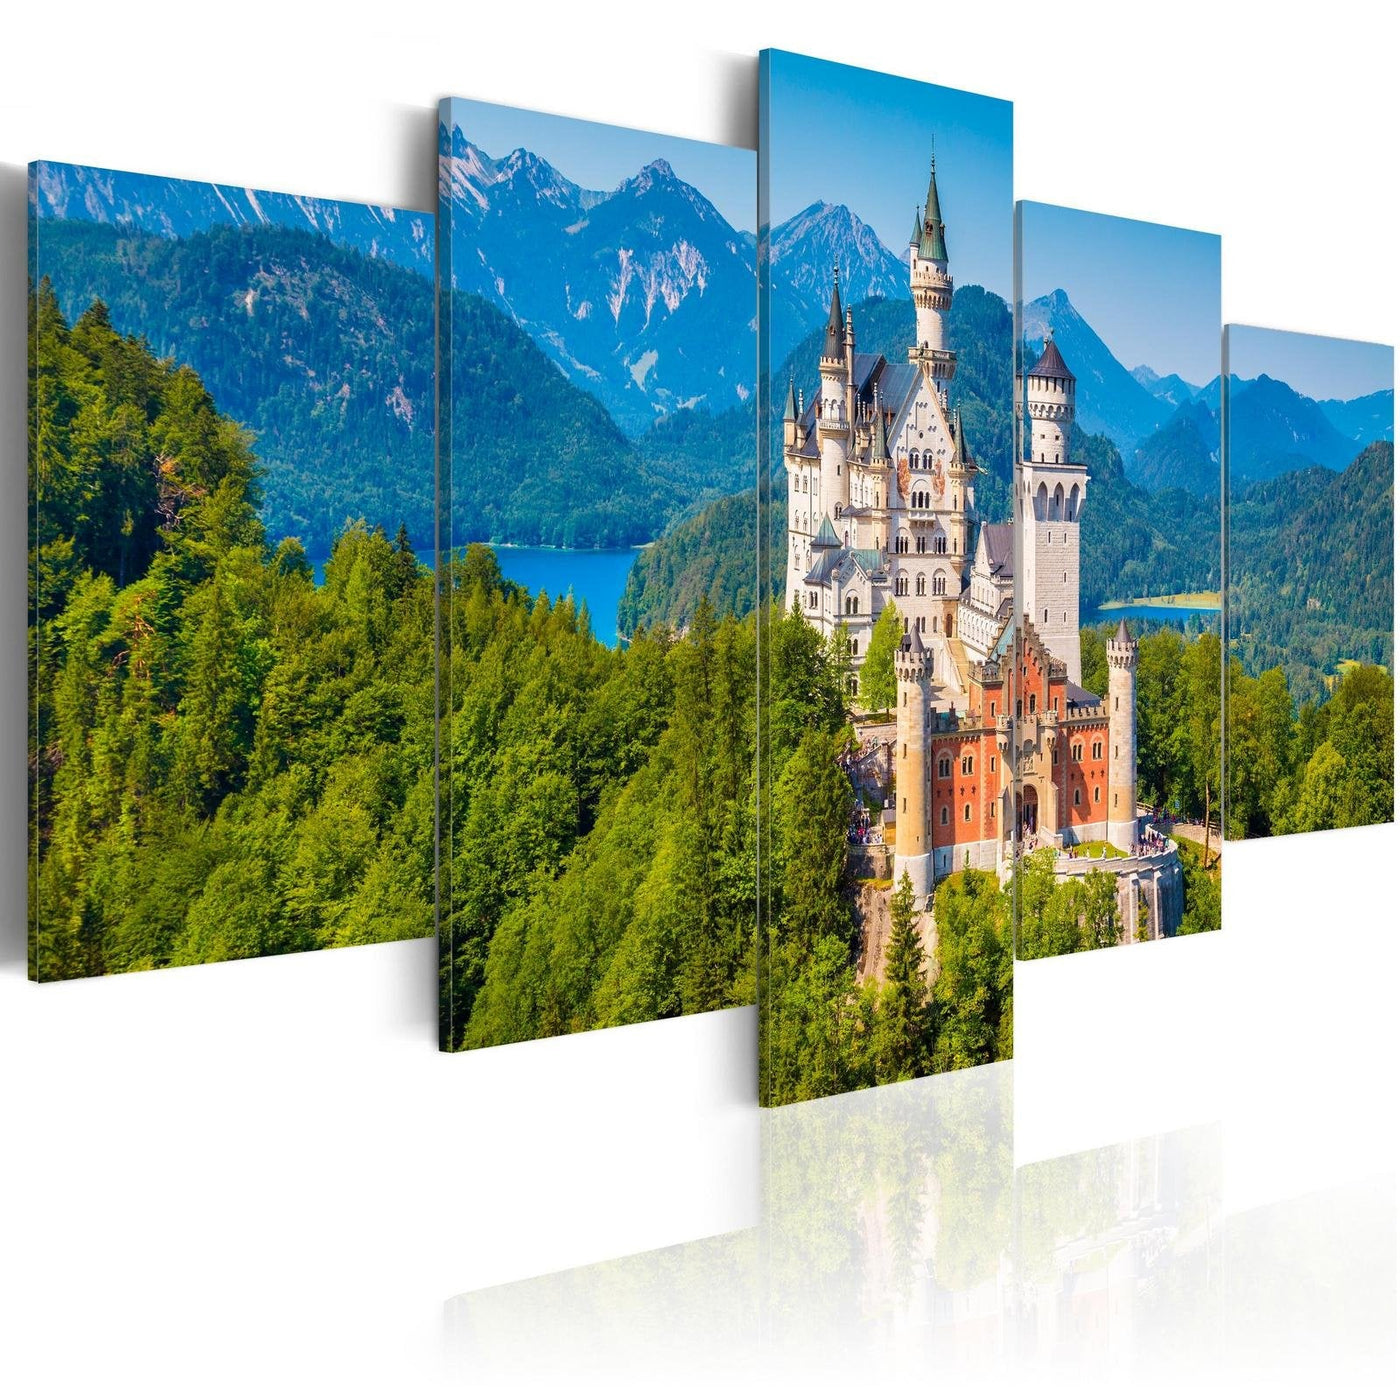 Stretched Canvas Landscape Art - Castle In The Mountains 5 Piece-Tiptophomedecor